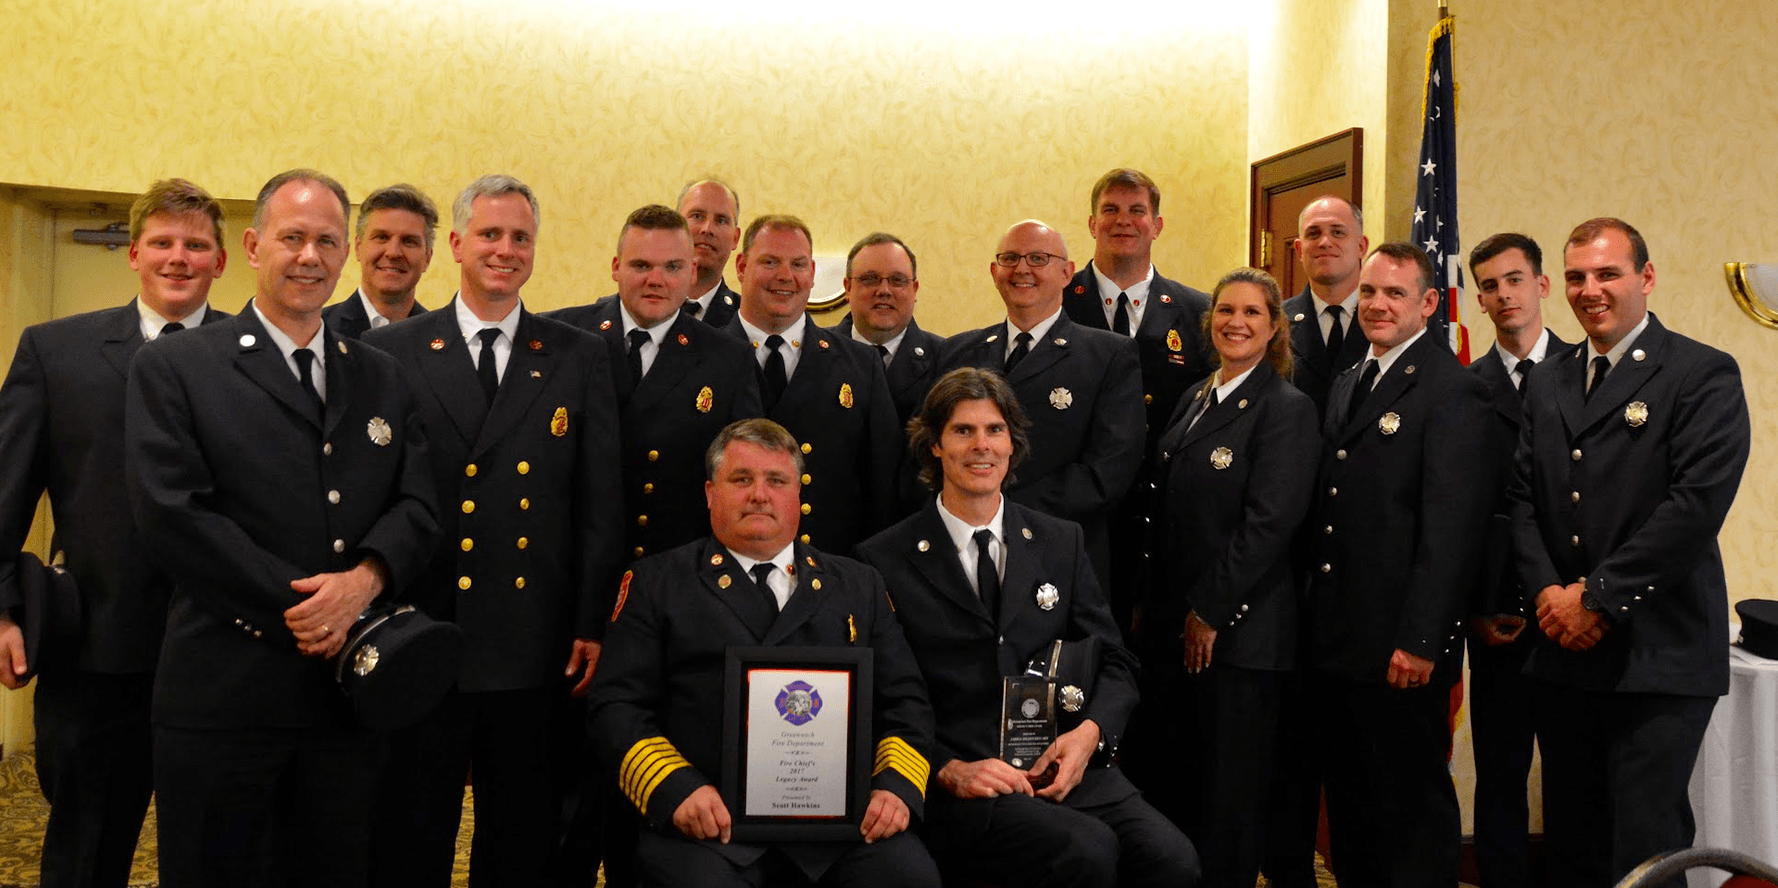 Members of the Sound Beach Volunteer Fire Dept. first row: L to R : Past District Chief Ronald S. Hawkins - GFD Legecy Award and James Bradford Sry - District Chief Award